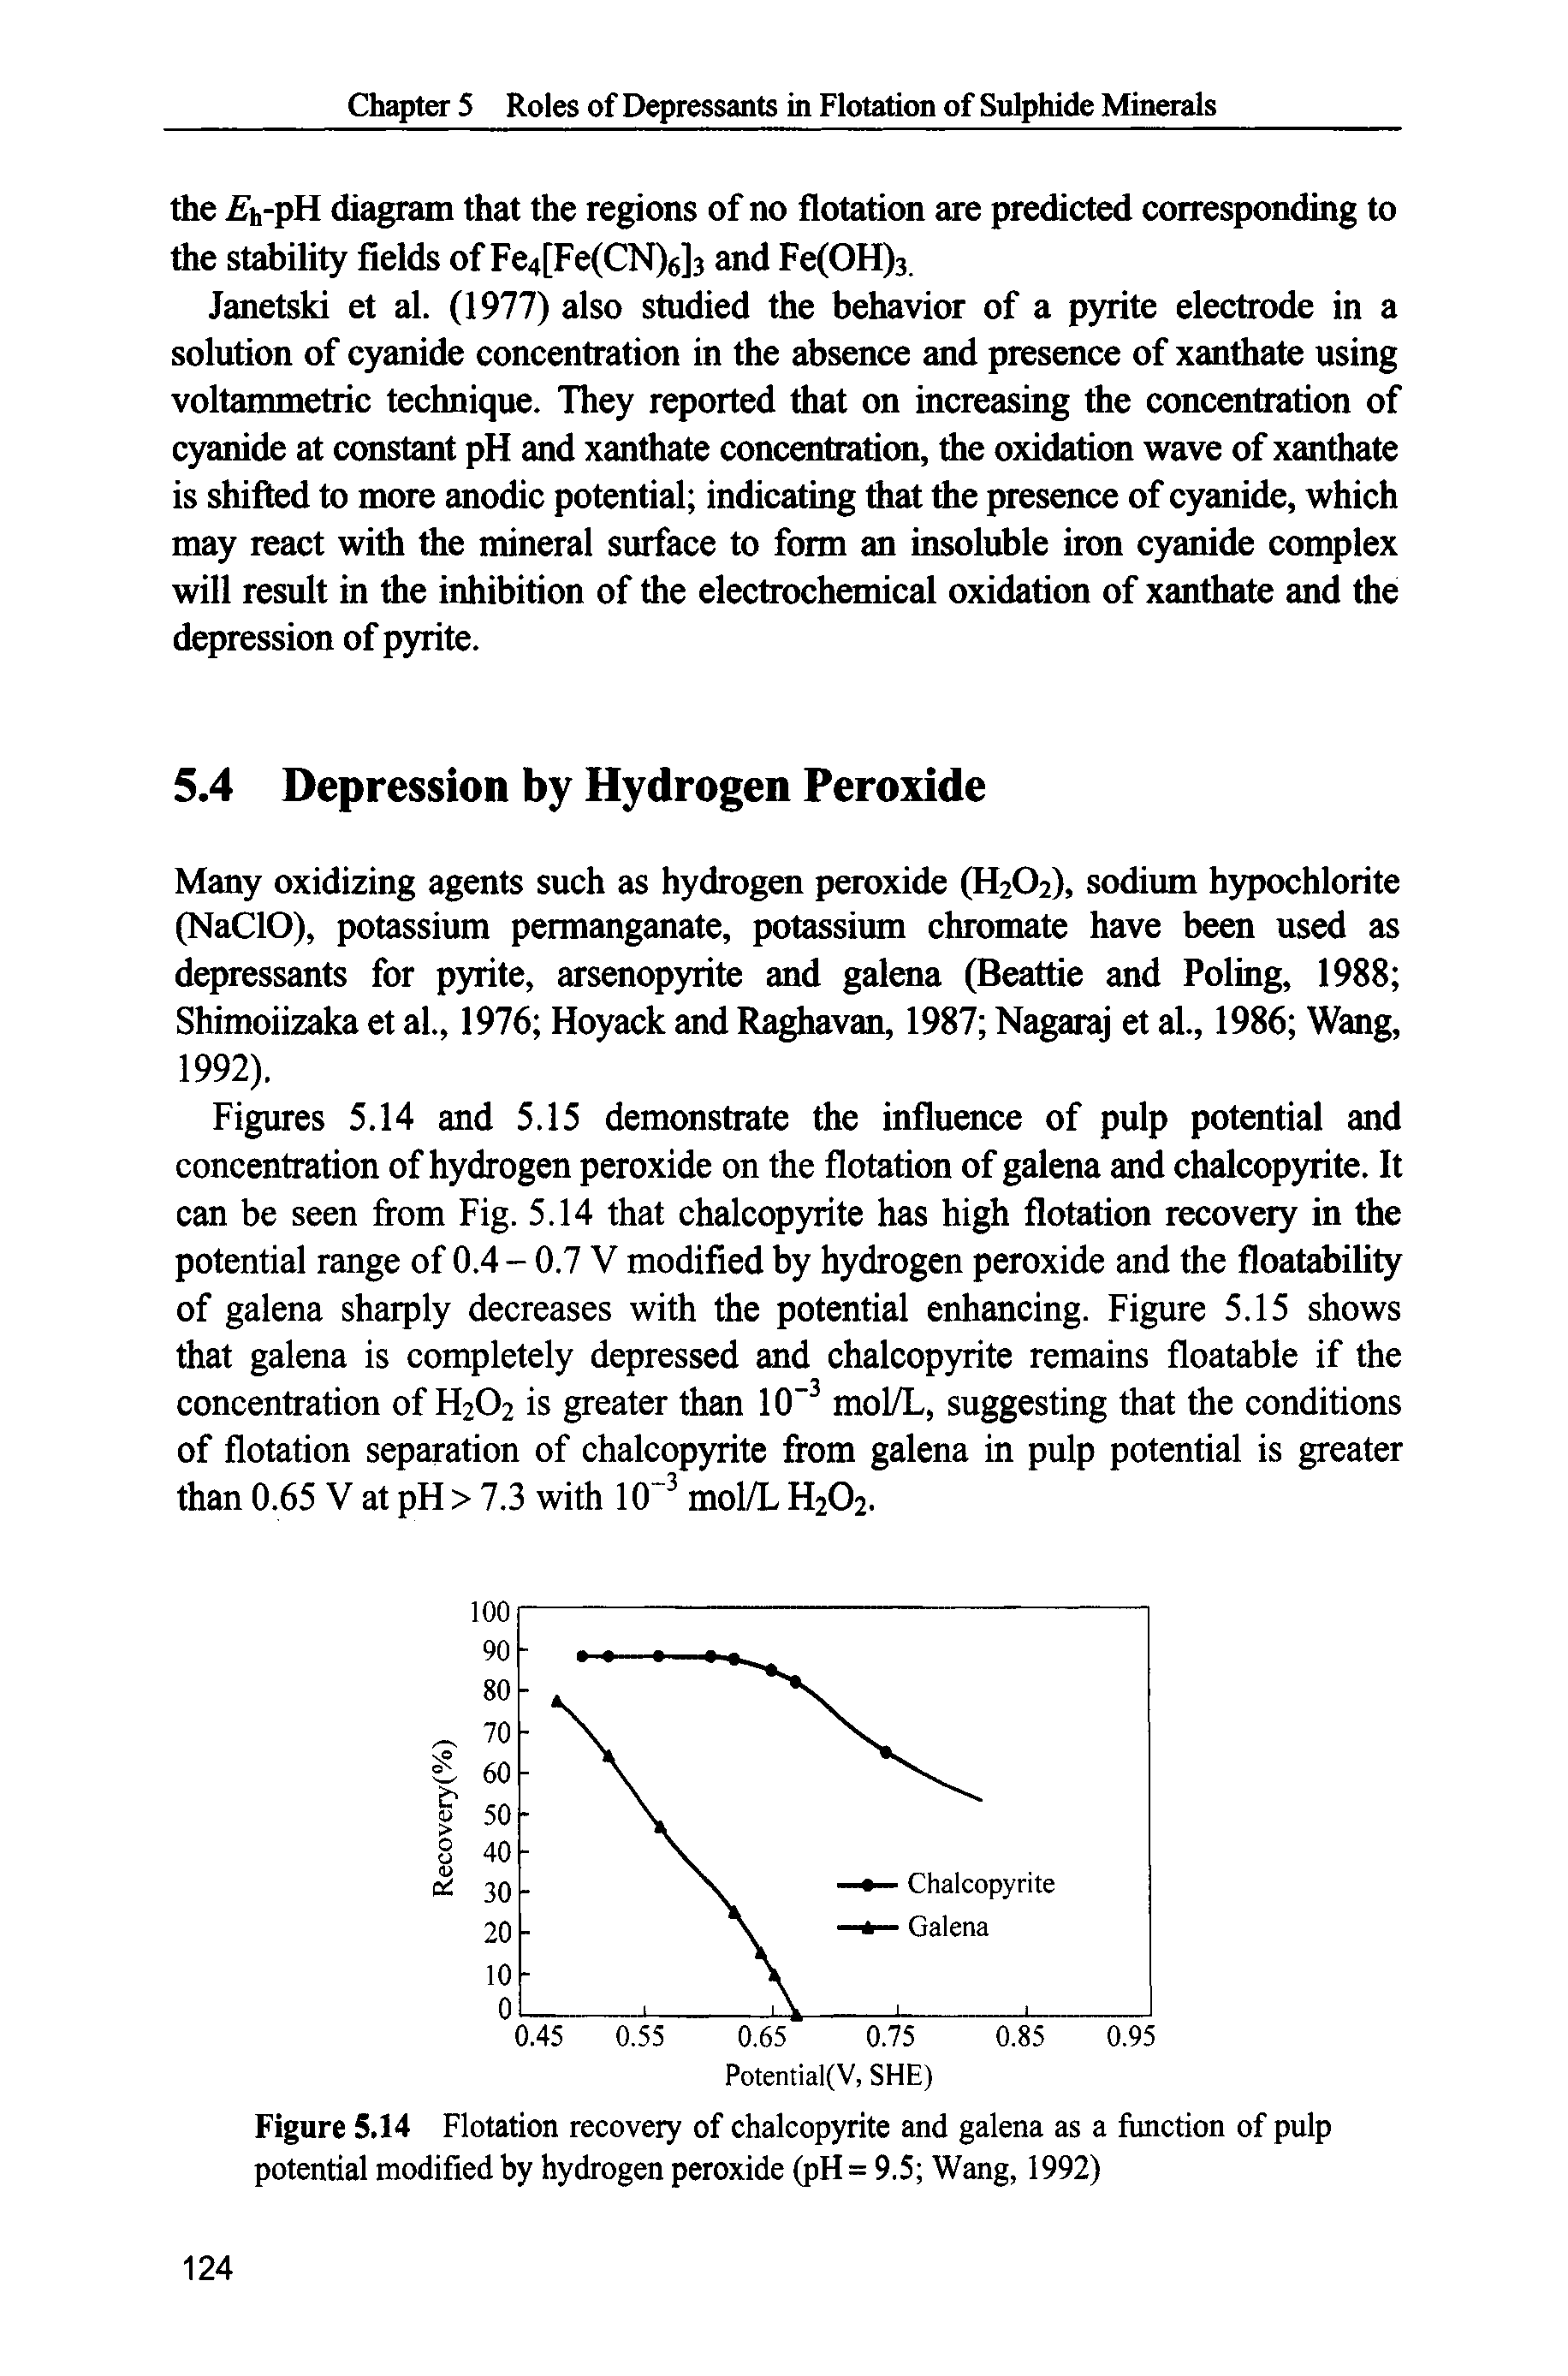 Figure 5.14 Flotation recovery of chalcopyrite and galena as a function of pulp potential modified by hydrogen peroxide (pH = 9.5 Wang, 1992)...